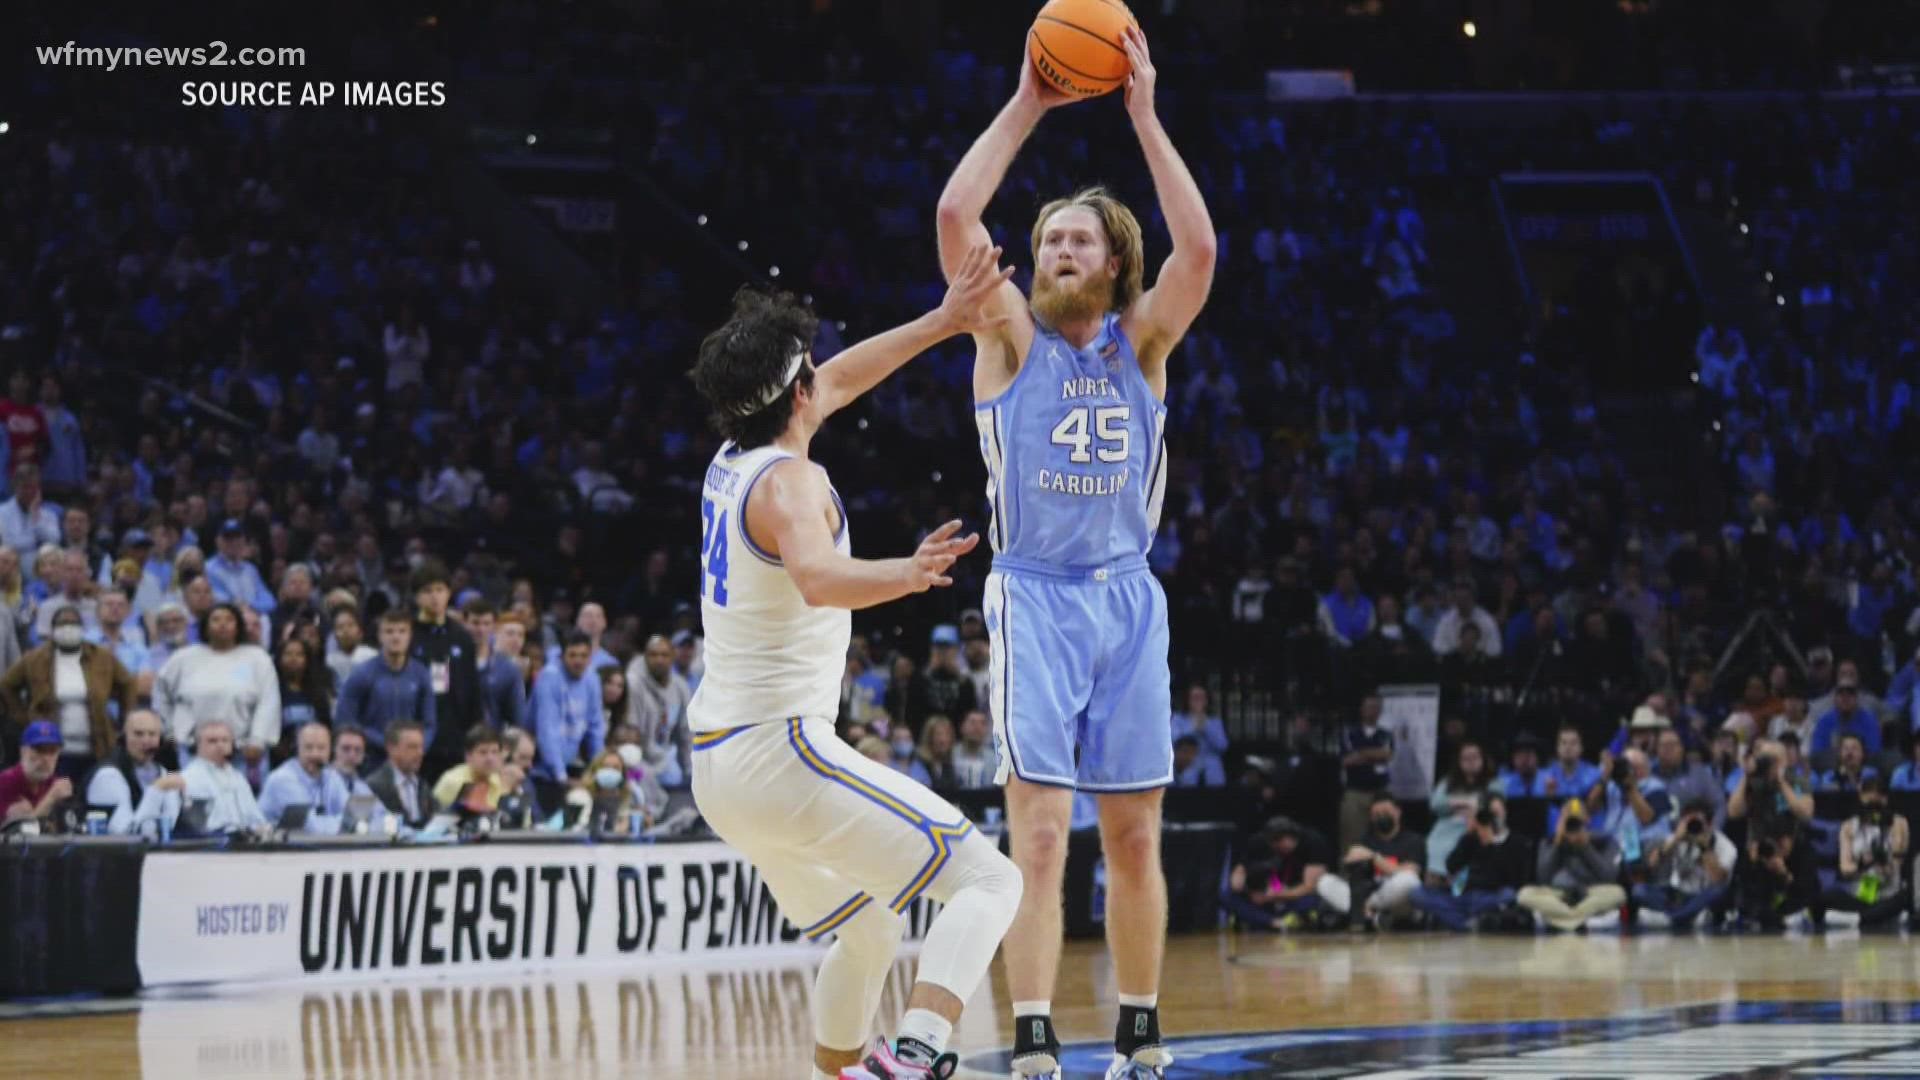 When does UNC play UCLA? Watch on WFMY/CBS Friday wfmynews2